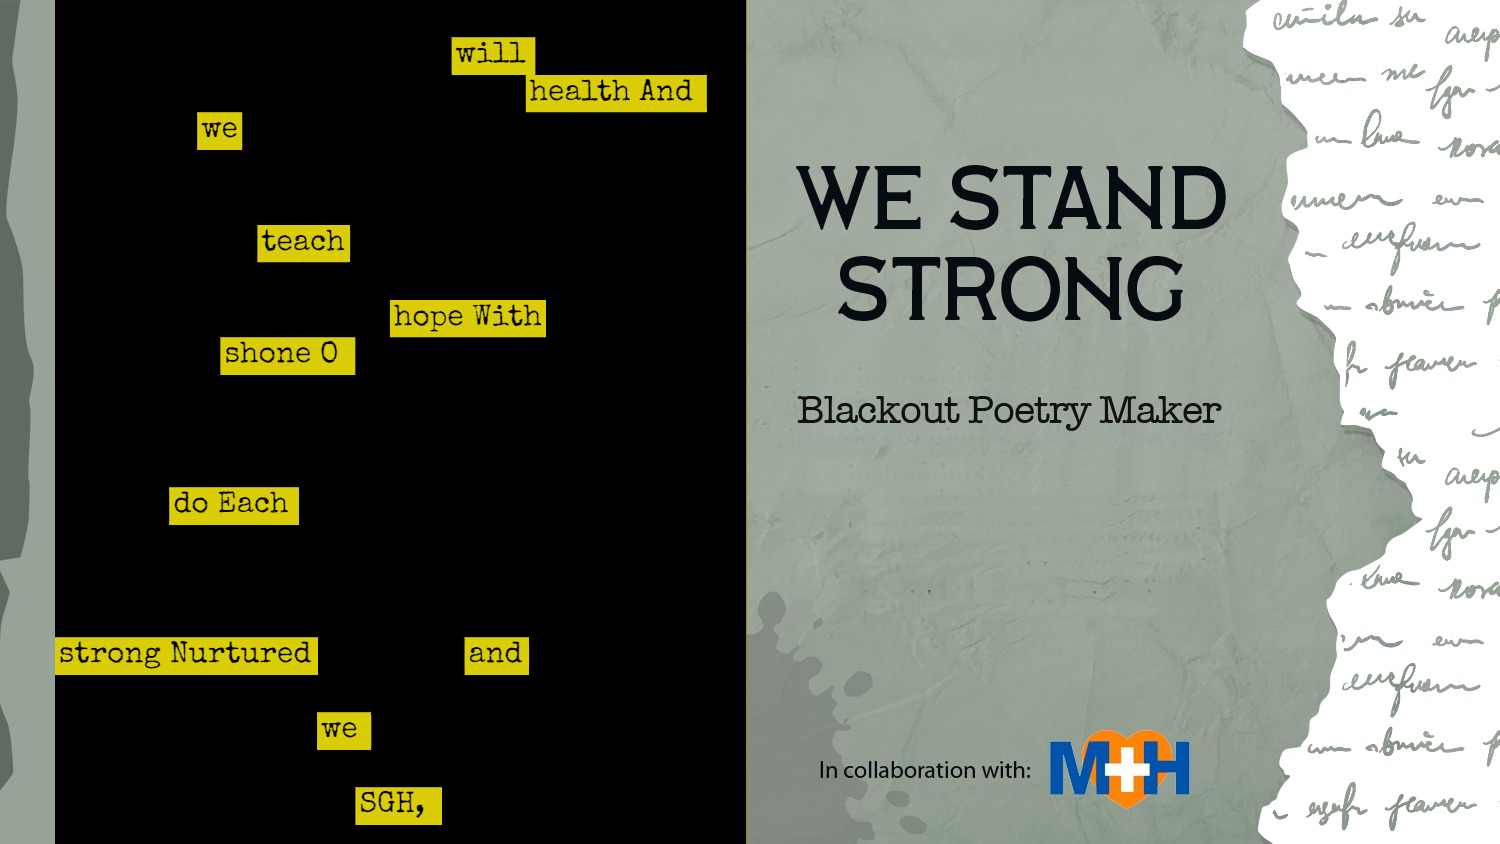 We Stand Strong - Blackout Poetry Maker